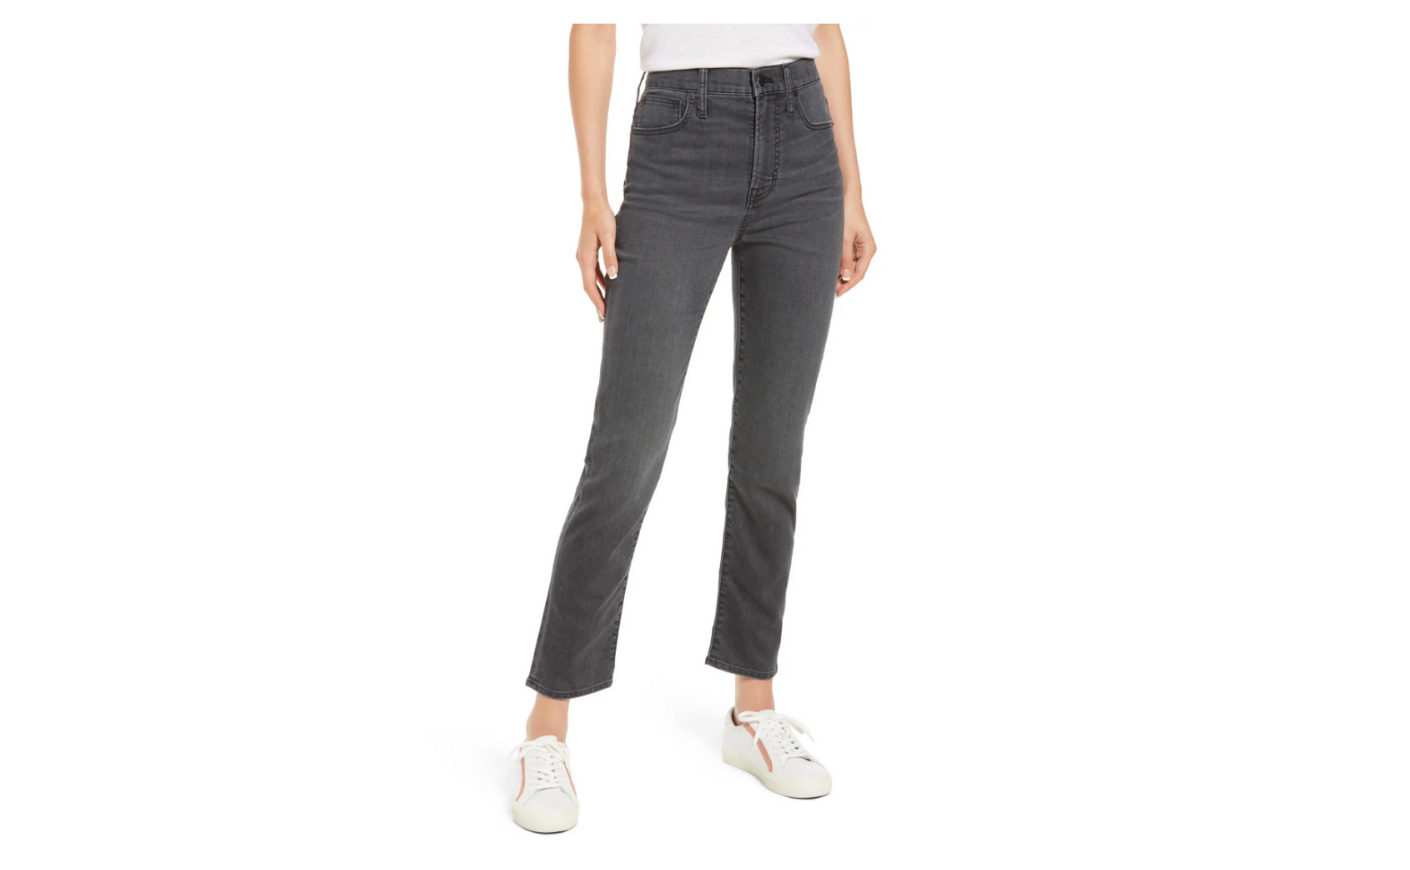 MadeWell jeans